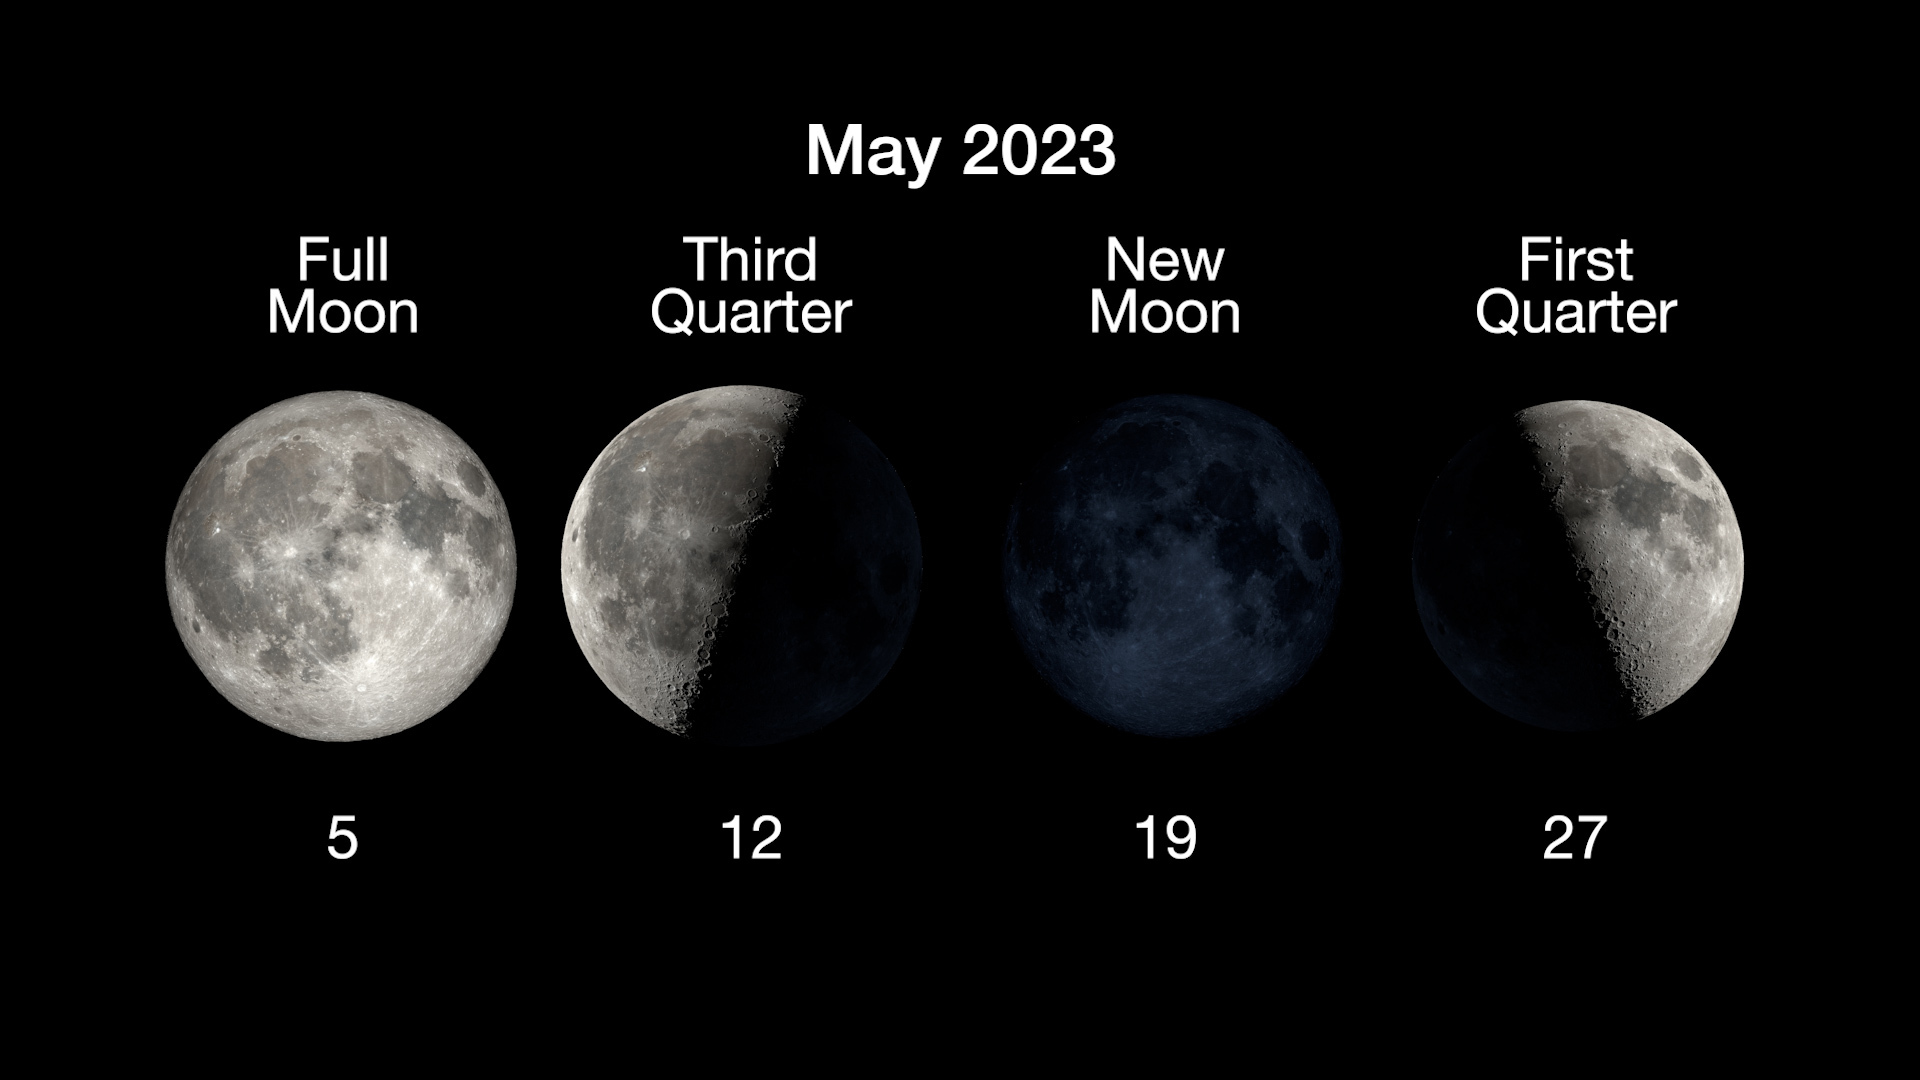 The four main phases of the Moon are illustrated in a horizontal row, with the full moon on May 5, third quarter on May 12, new moon on May 19, and first quarter on May 27.